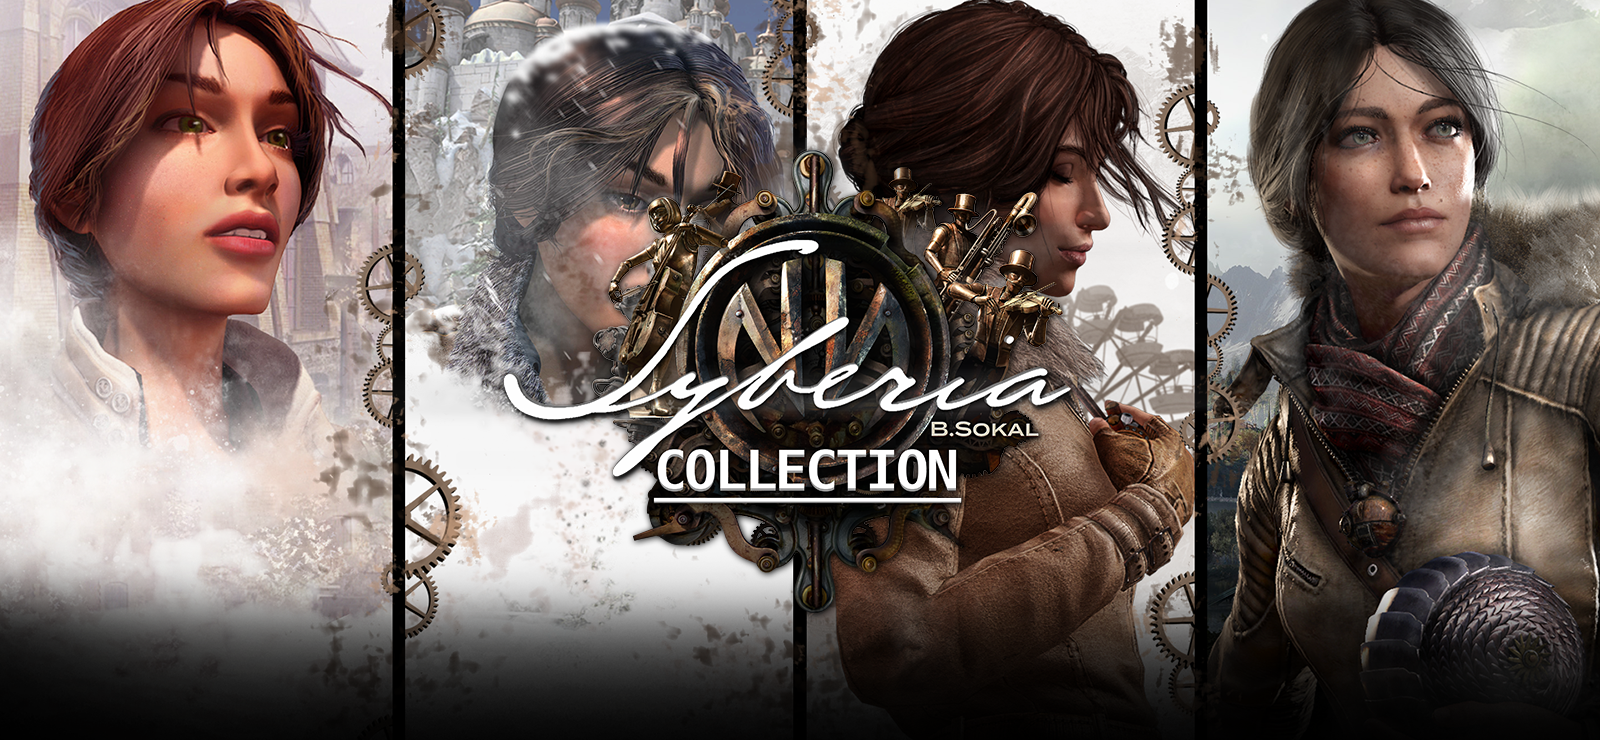 The Syberia Collection